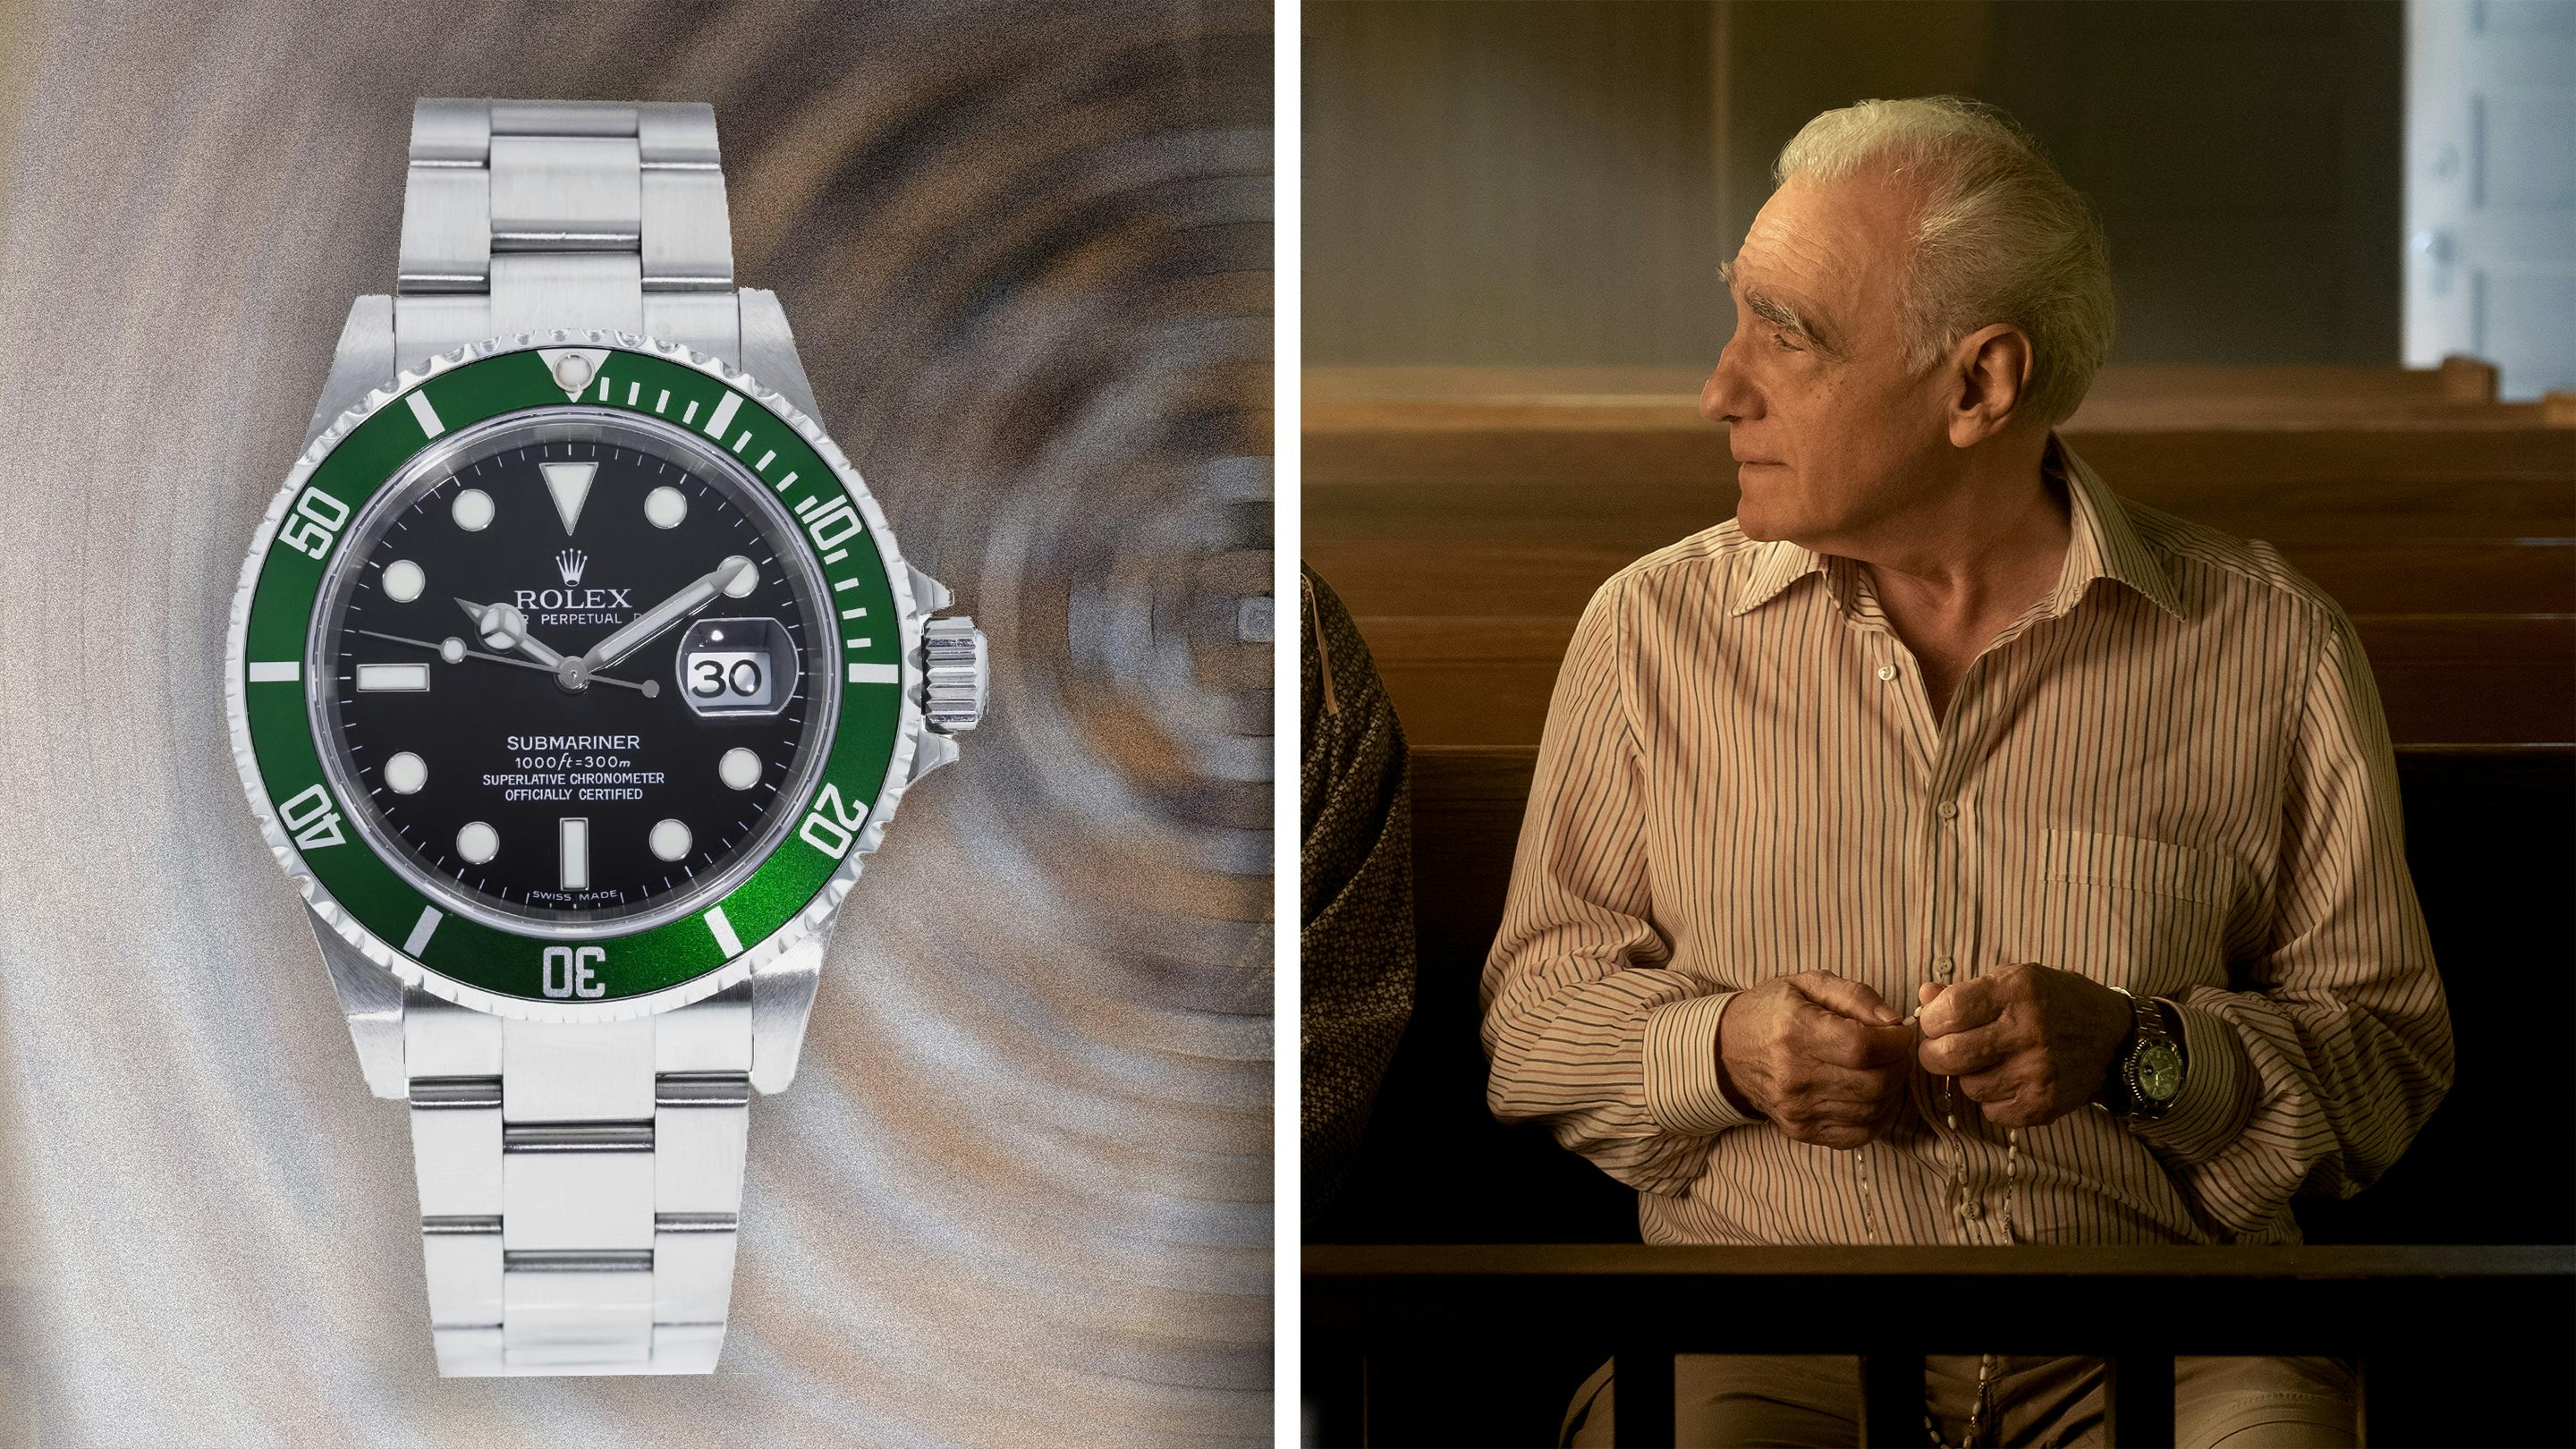 Martin Scorsese Wore A Special Green Rolex Submariner While